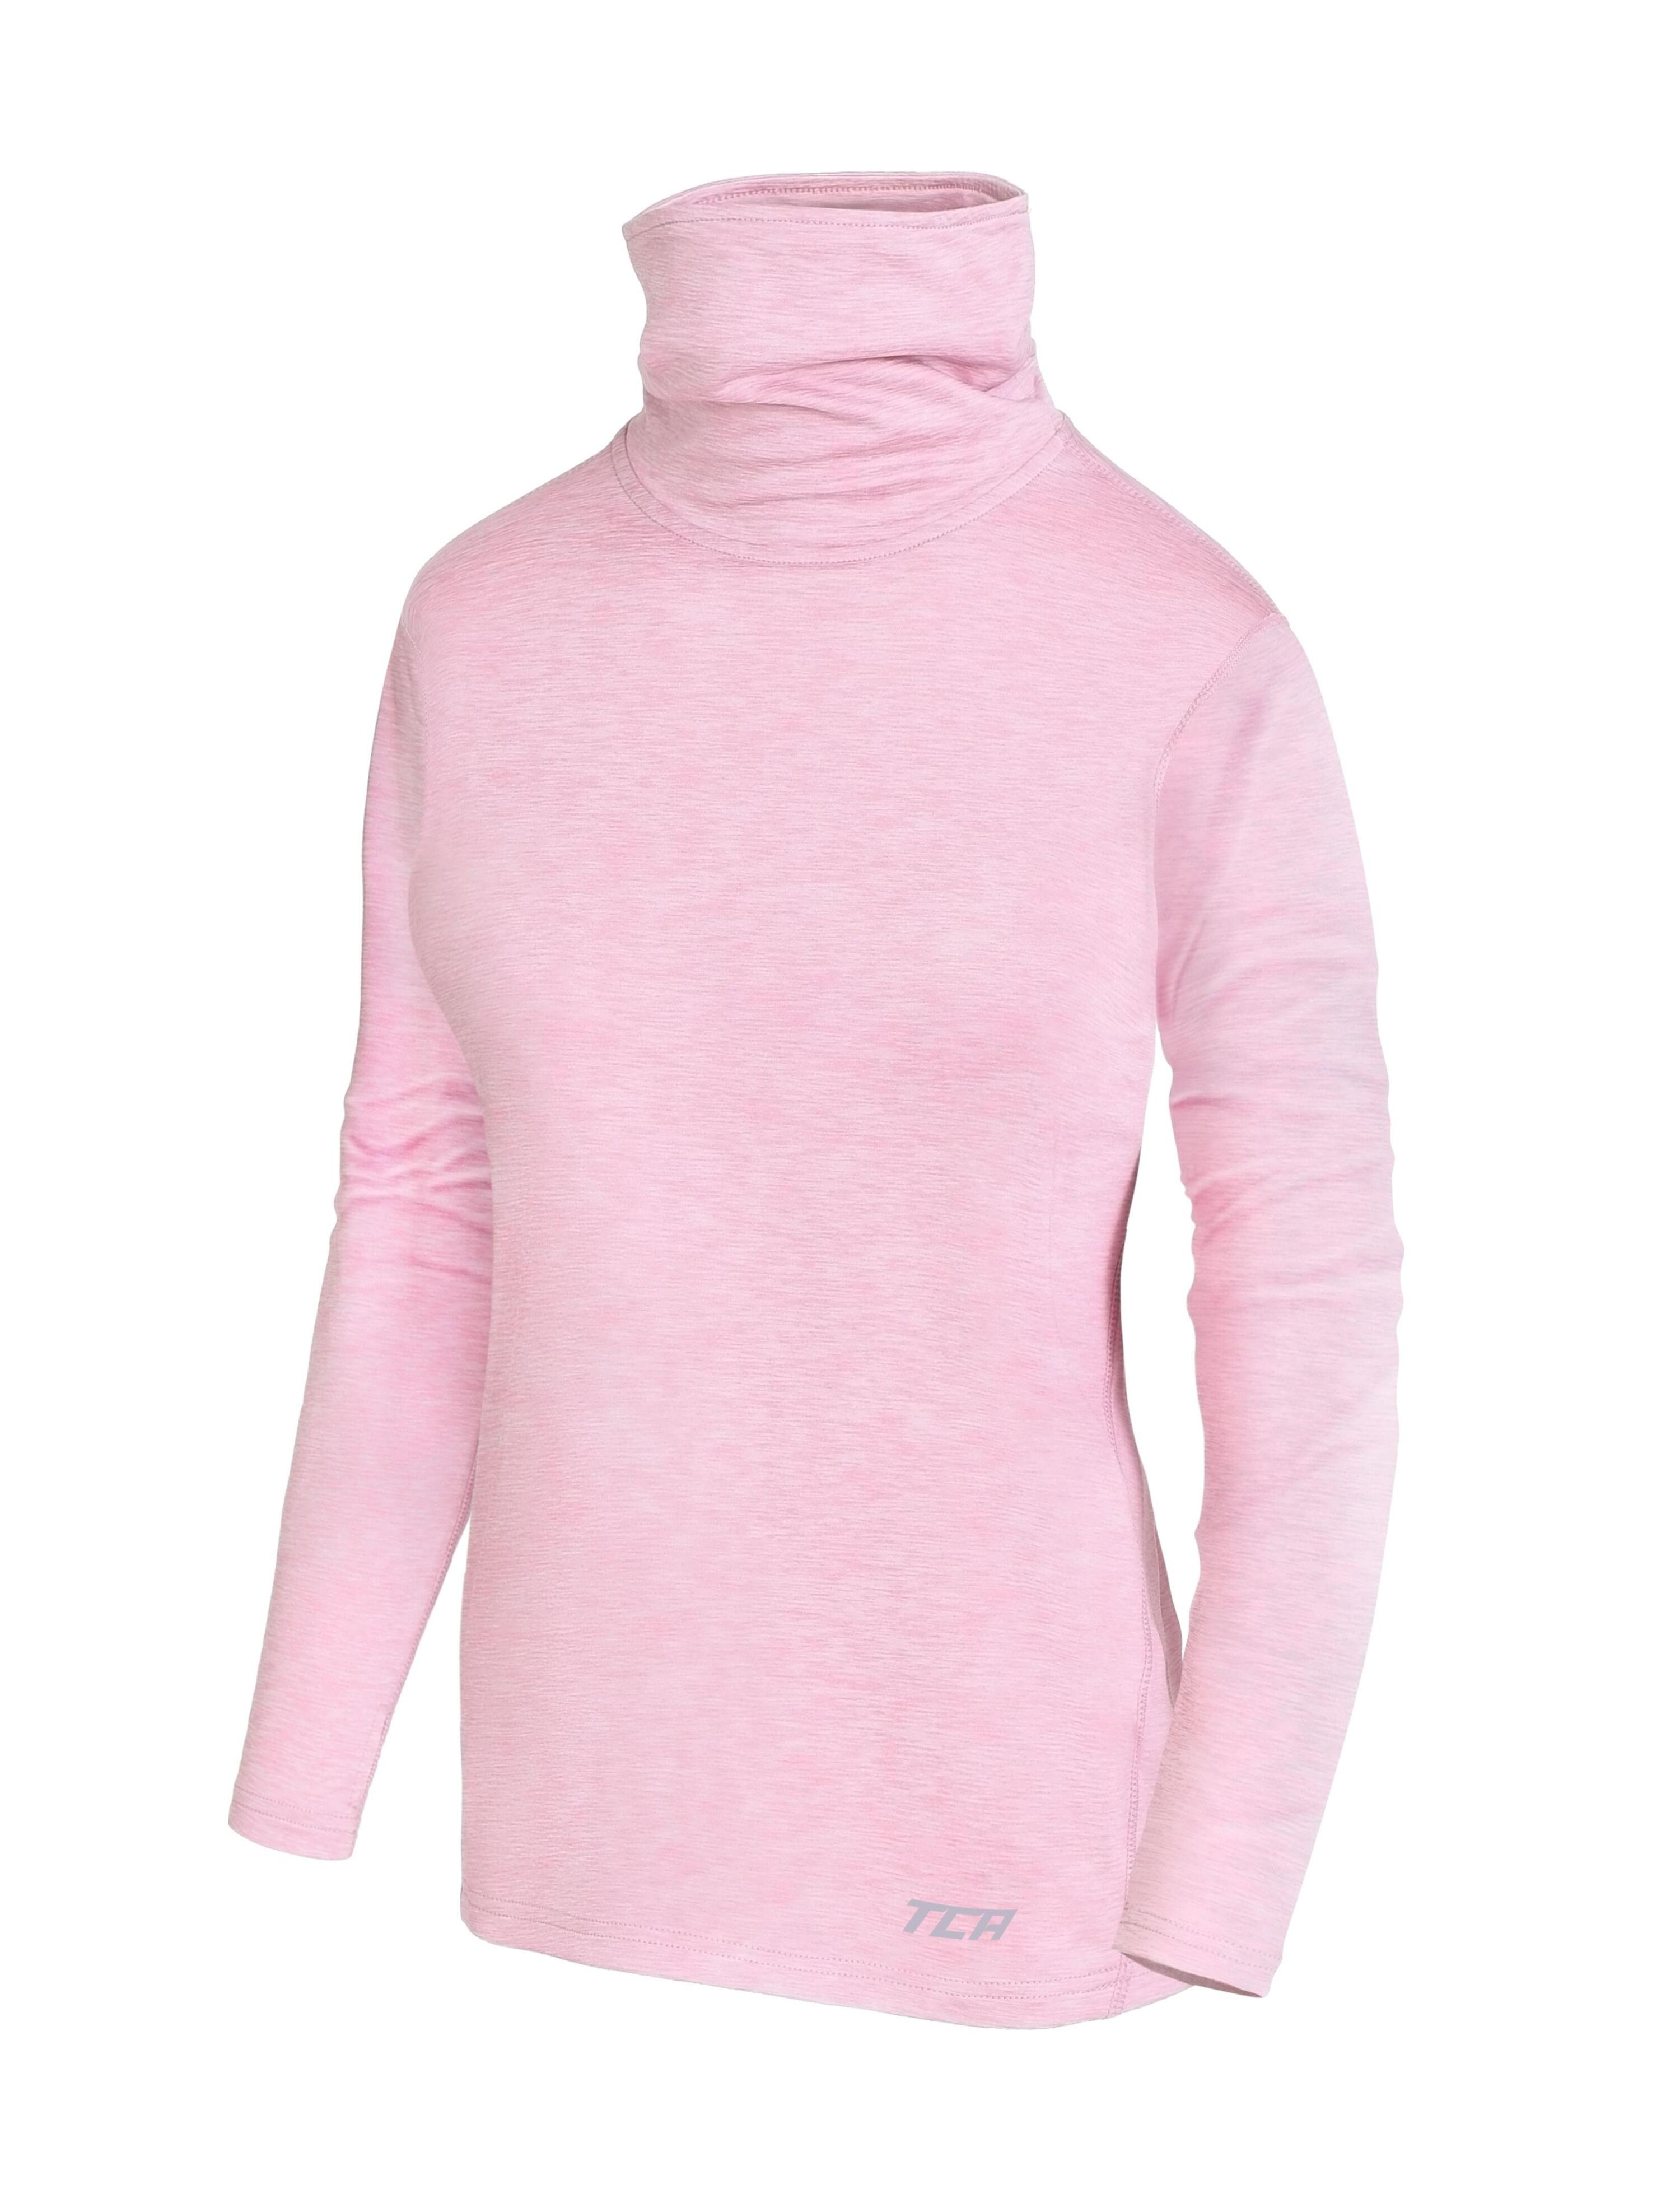 TCA Girls' Thermal Funnel Neck Top - Sweet Lilac Marl